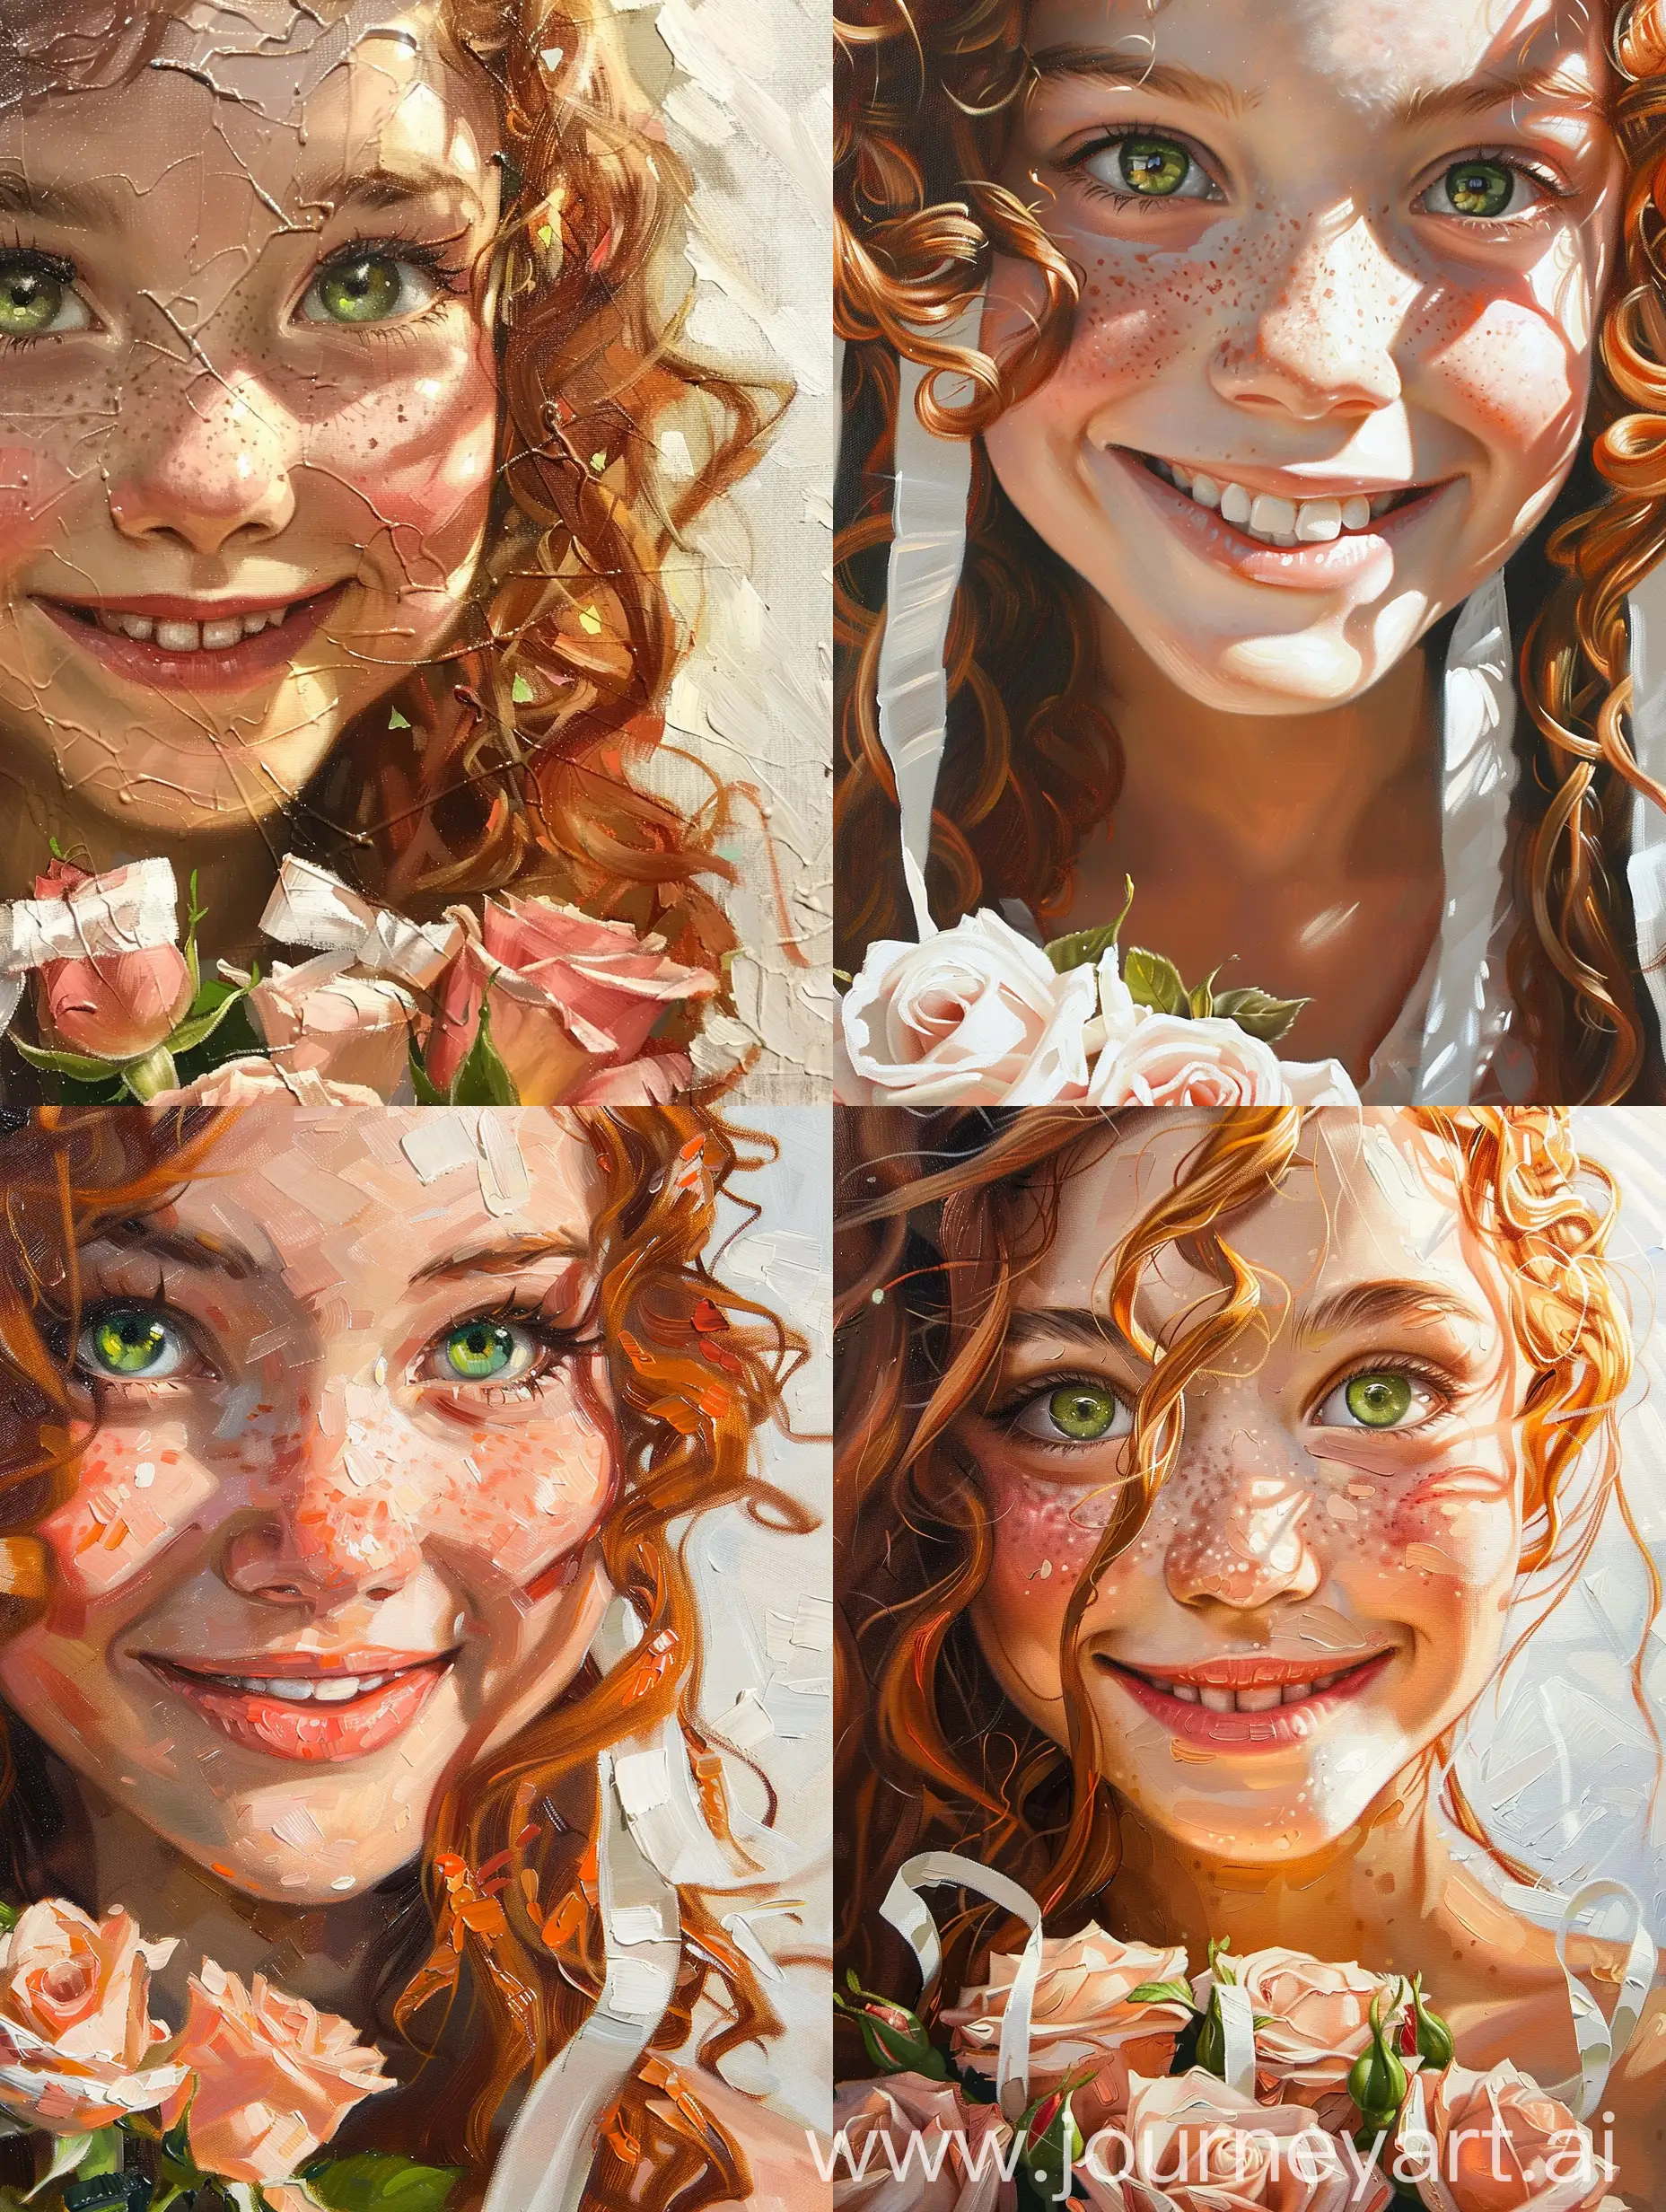 Whimsical-Oil-Painting-of-a-Joyful-RedHaired-Girl-with-Roses